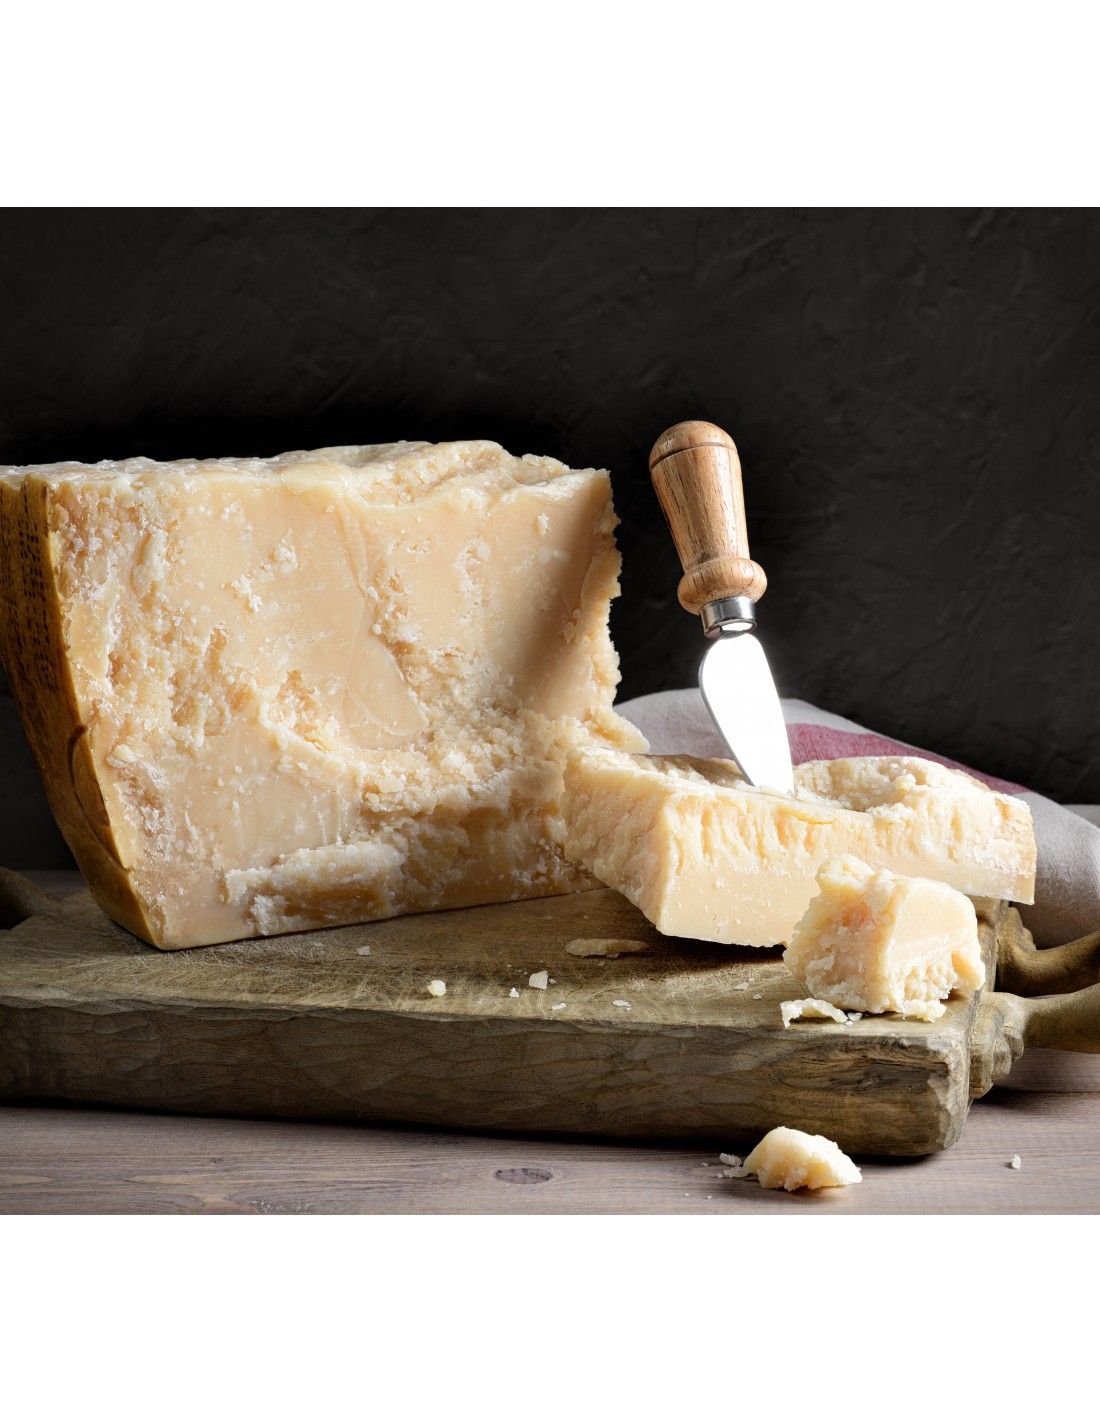 Parmigiano Reggiano PDO from the hills 24 months, 1,350 kg + cheese grater  + cheese container + cheese knife